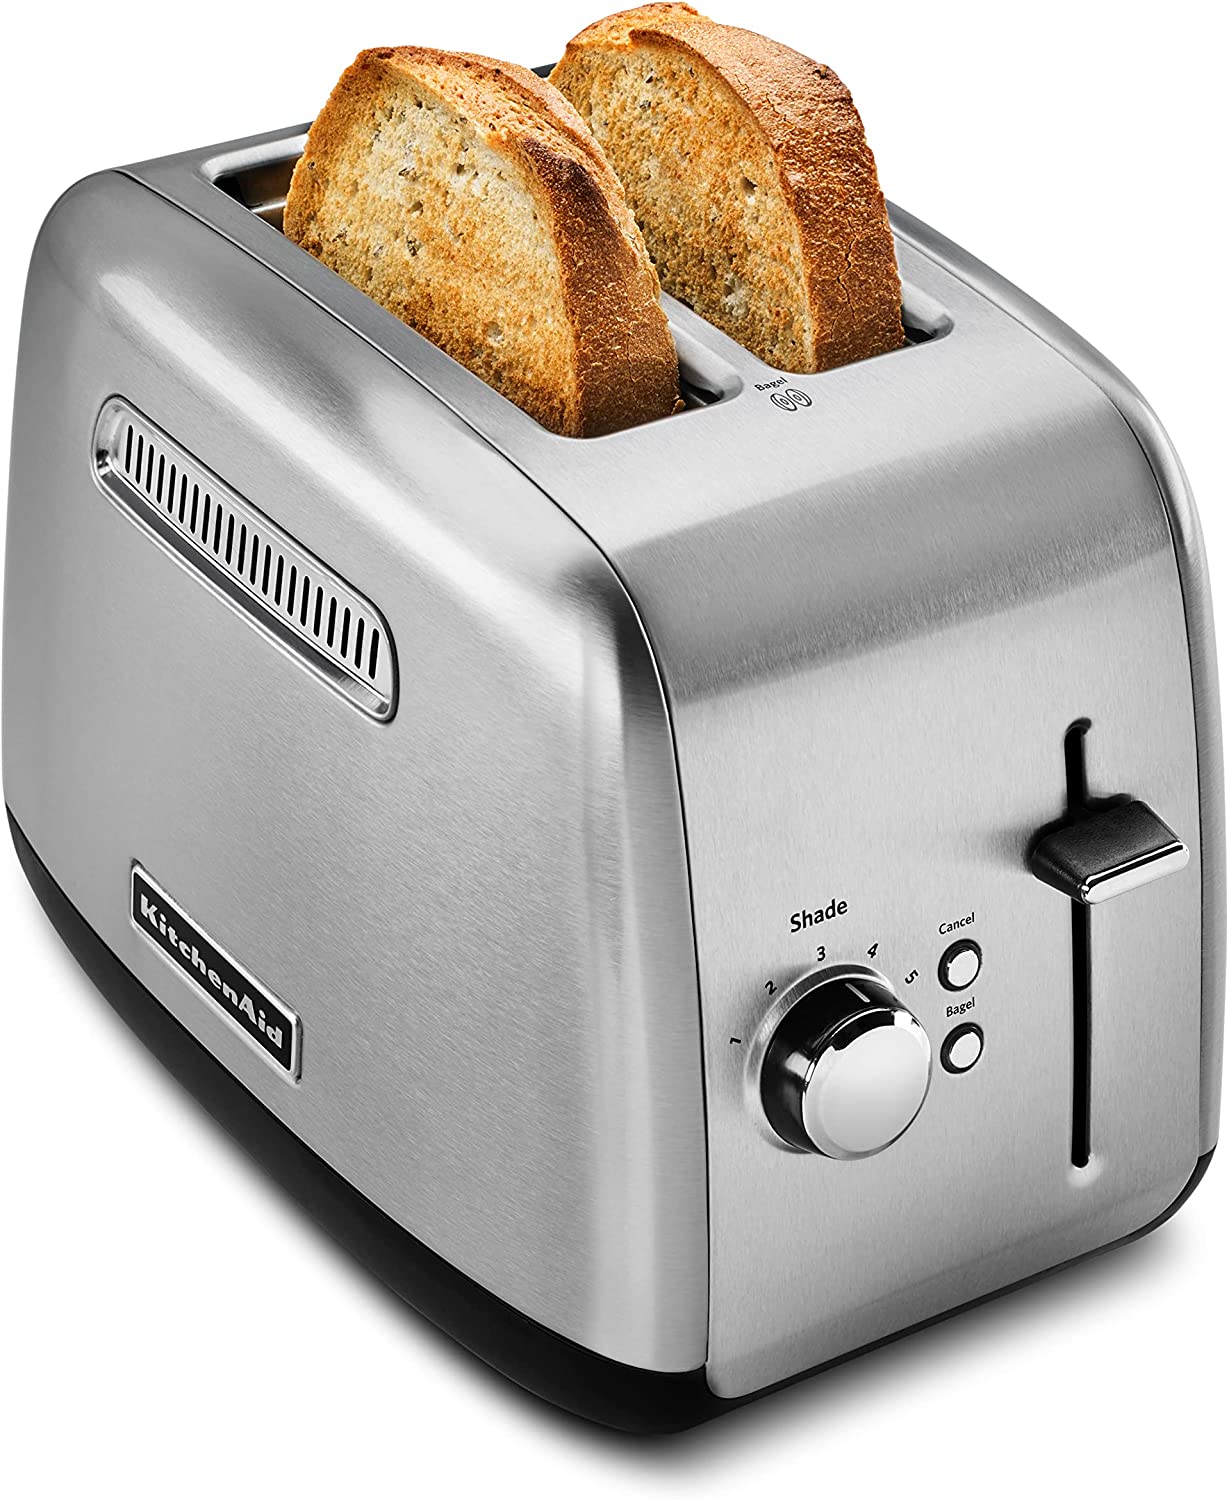 https://bigbigmart.com/wp-content/uploads/2023/05/KitchenAid-KMT2115SX-Stainless-Steel-Toaster-Brushed-Stainless-Steel3.jpg